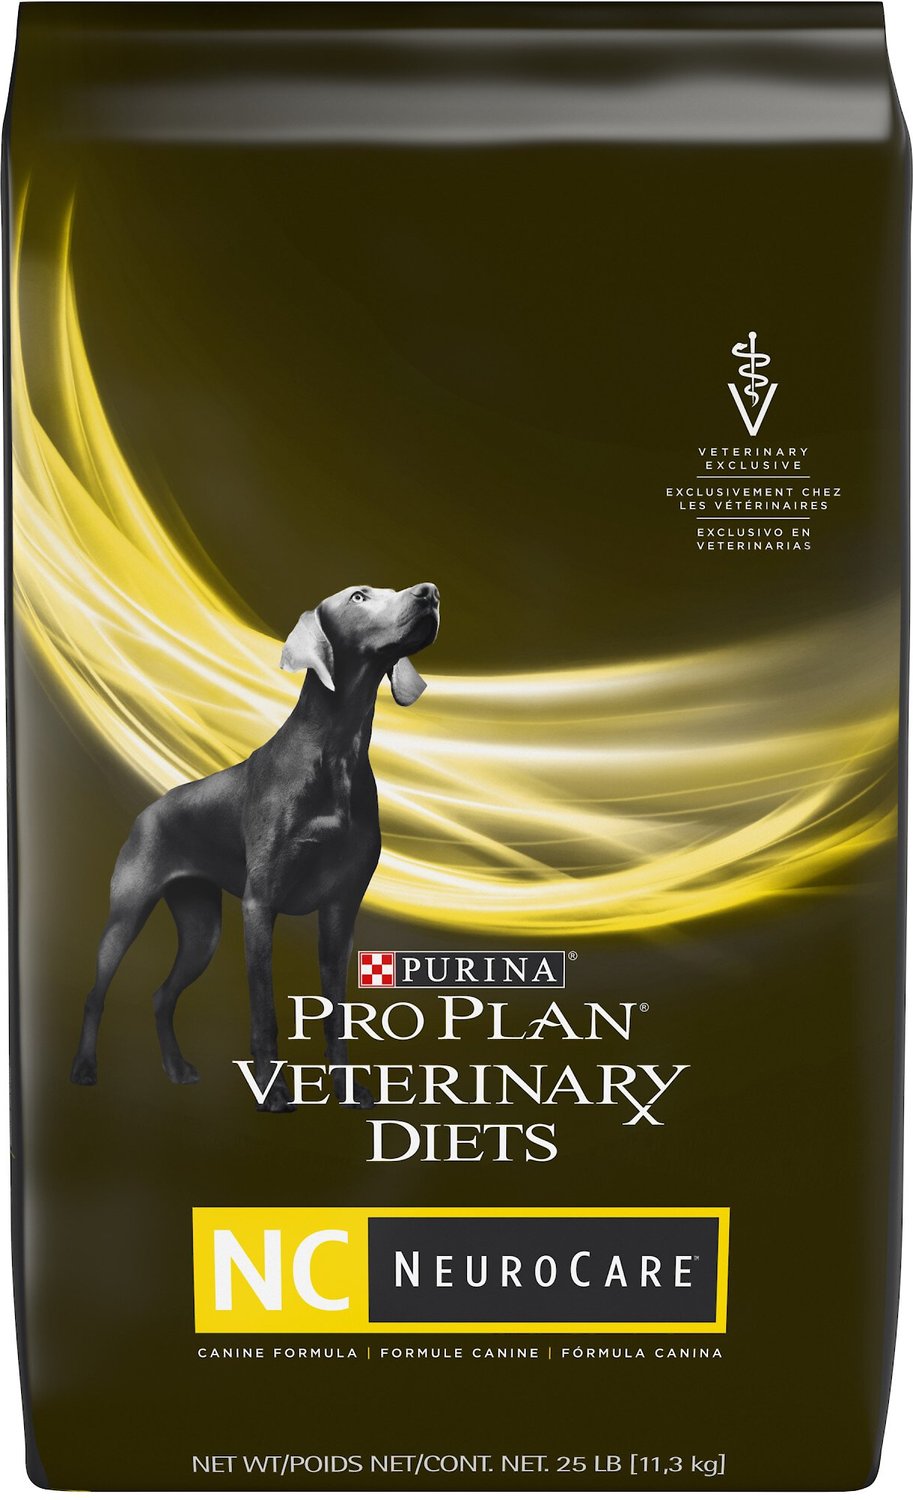 purina-pro-plan-veterinary-diets-om-overweight-management-select-blend